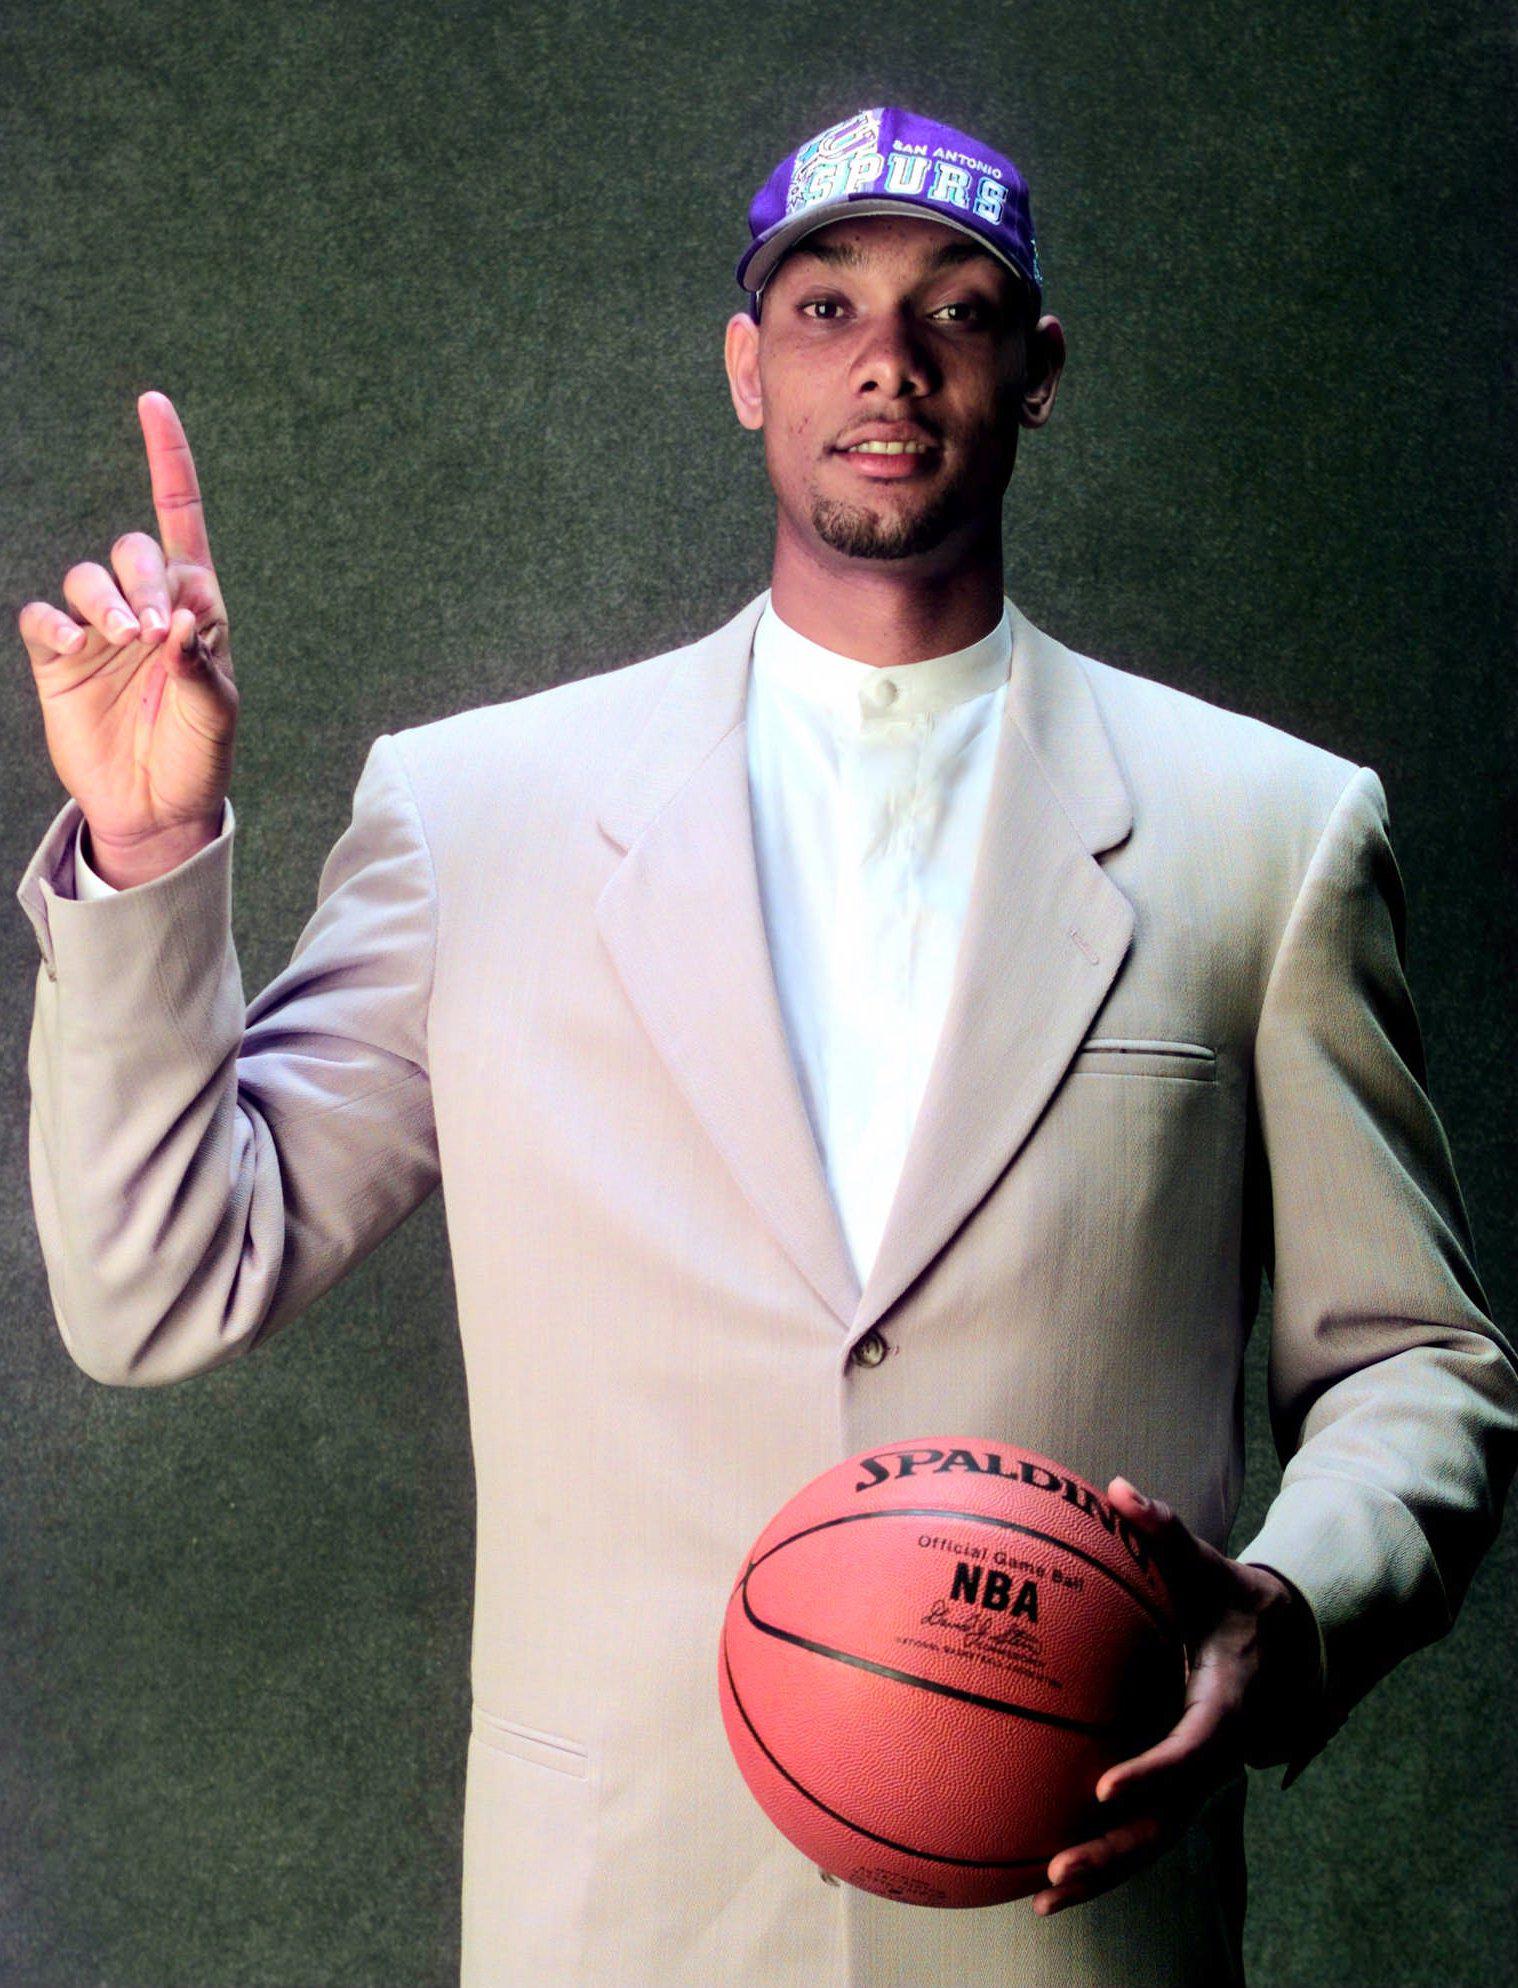 2001 Draft- The Spurs showcase foresight as they drafted unknown